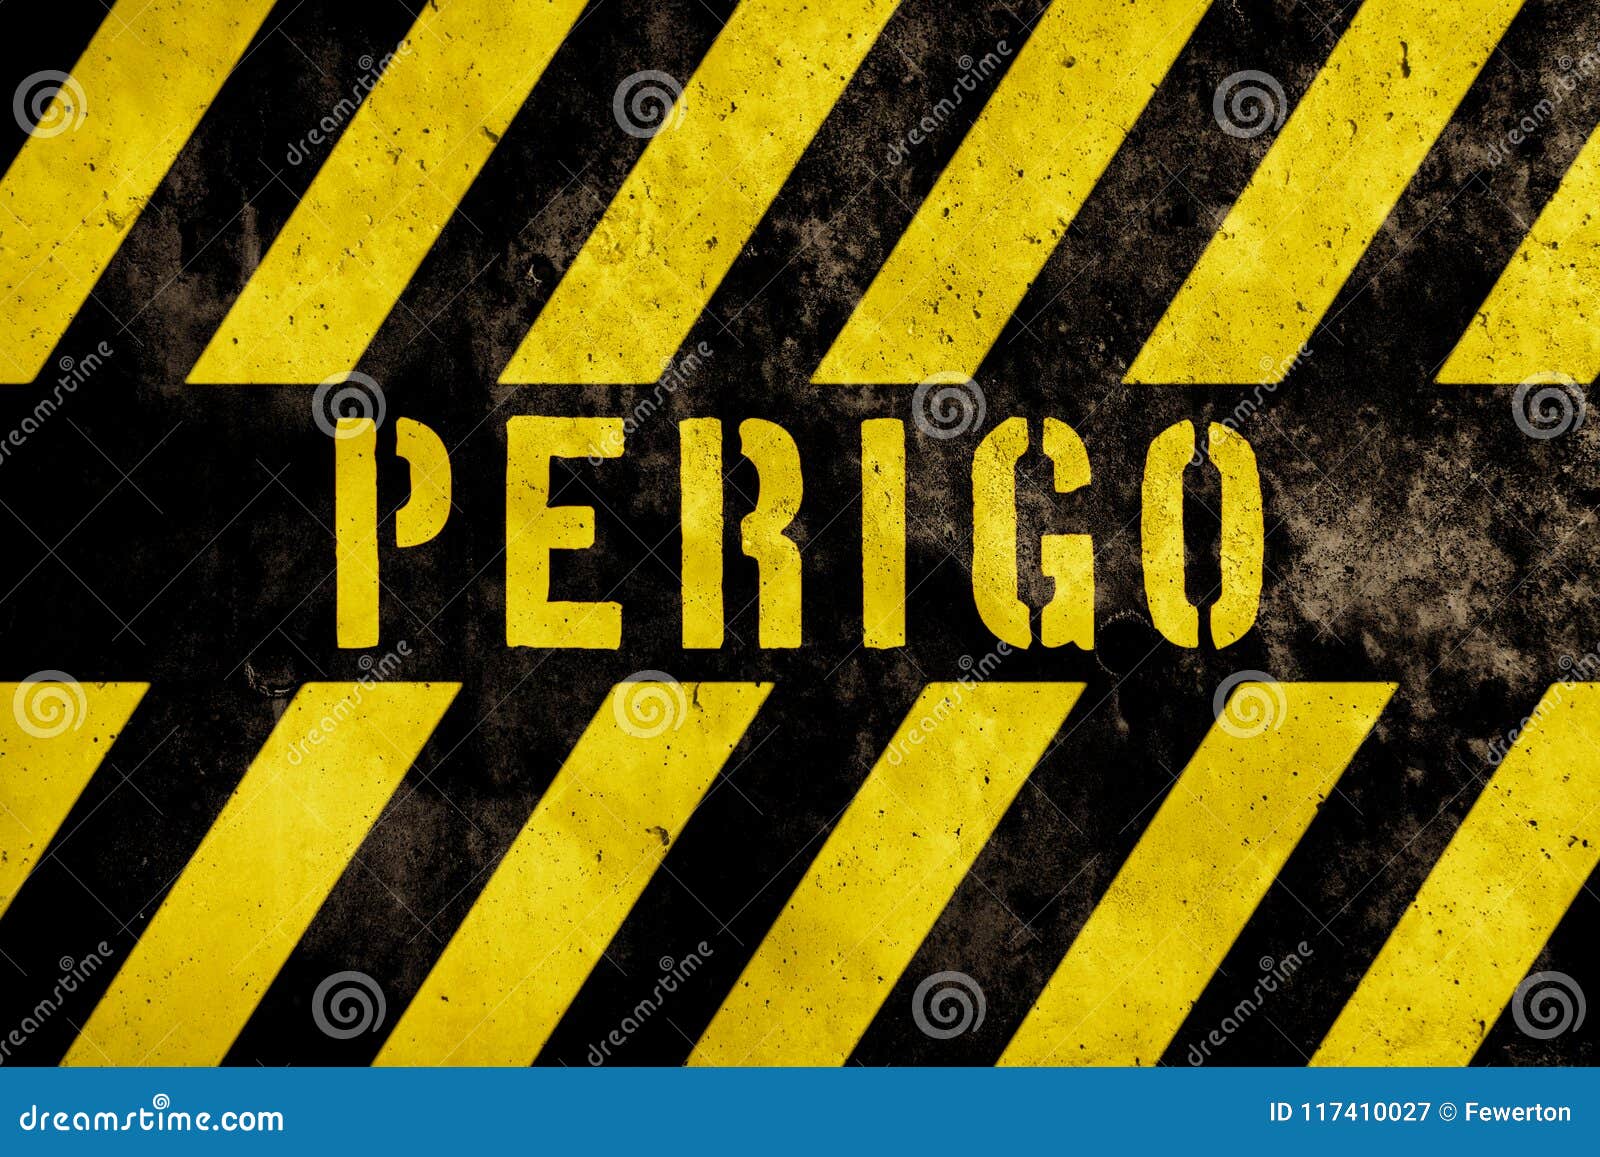 perigo in portuguese language, danger warning sign text with yellow and dark stripes painted over concrete wall facade texture